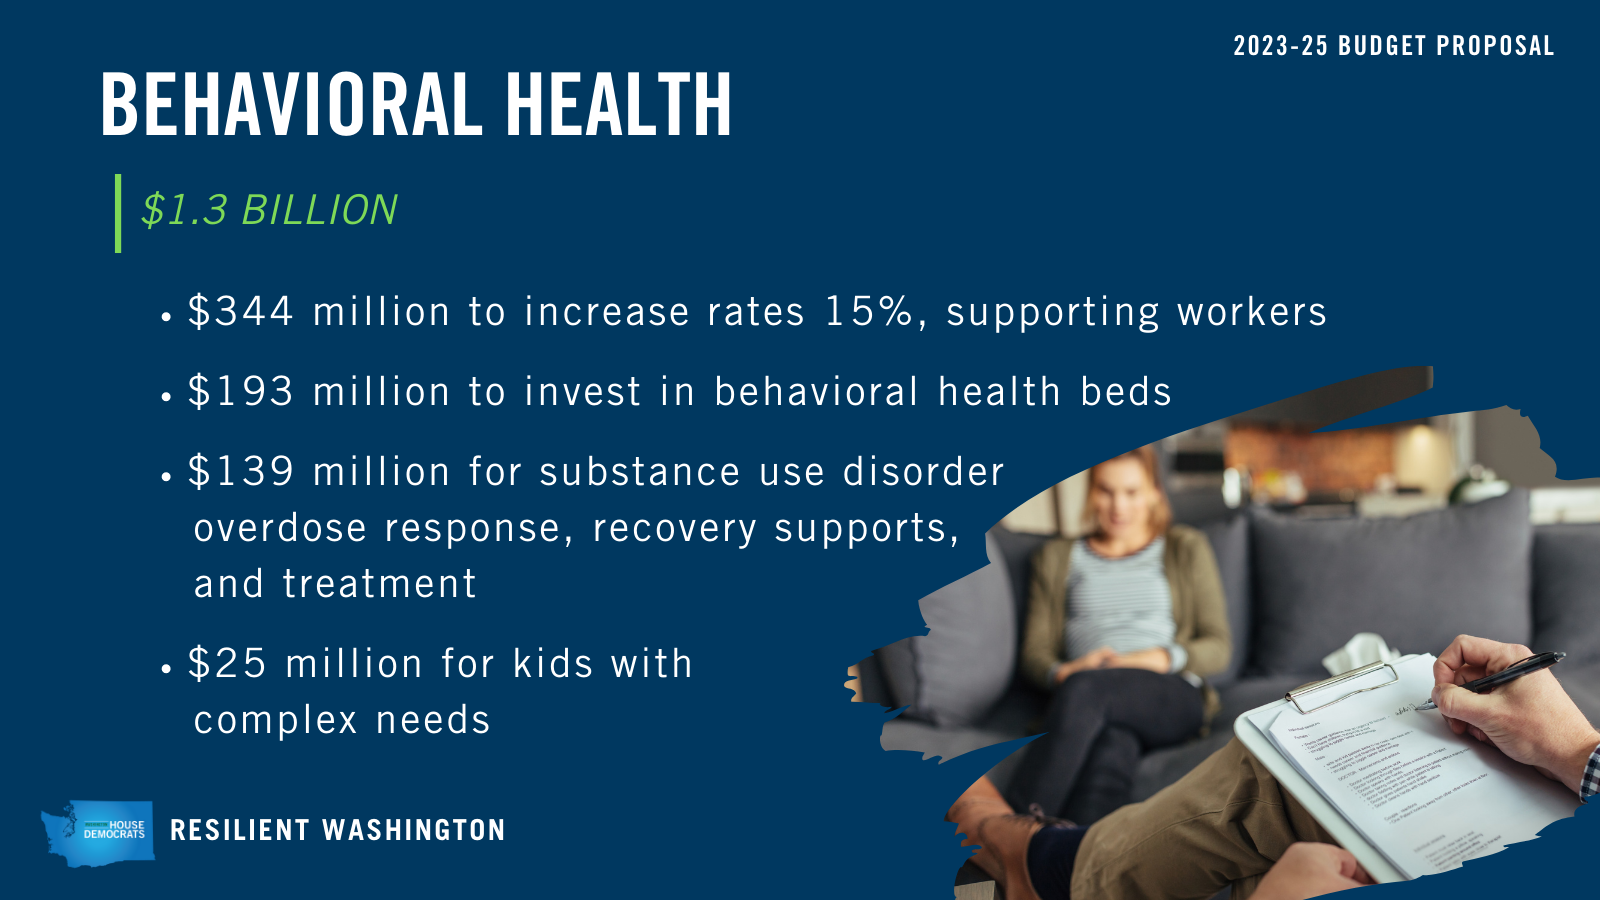 Key funding for behavioral health includes $344 million to increase rates 15%, supporting workers, $193 million to invest in behavioral health beds, $139 million for substance use disorder overdose response, recovery supports, and treatment, and $25 million for kids with complex needs. Overall investments total $1.3 billion.